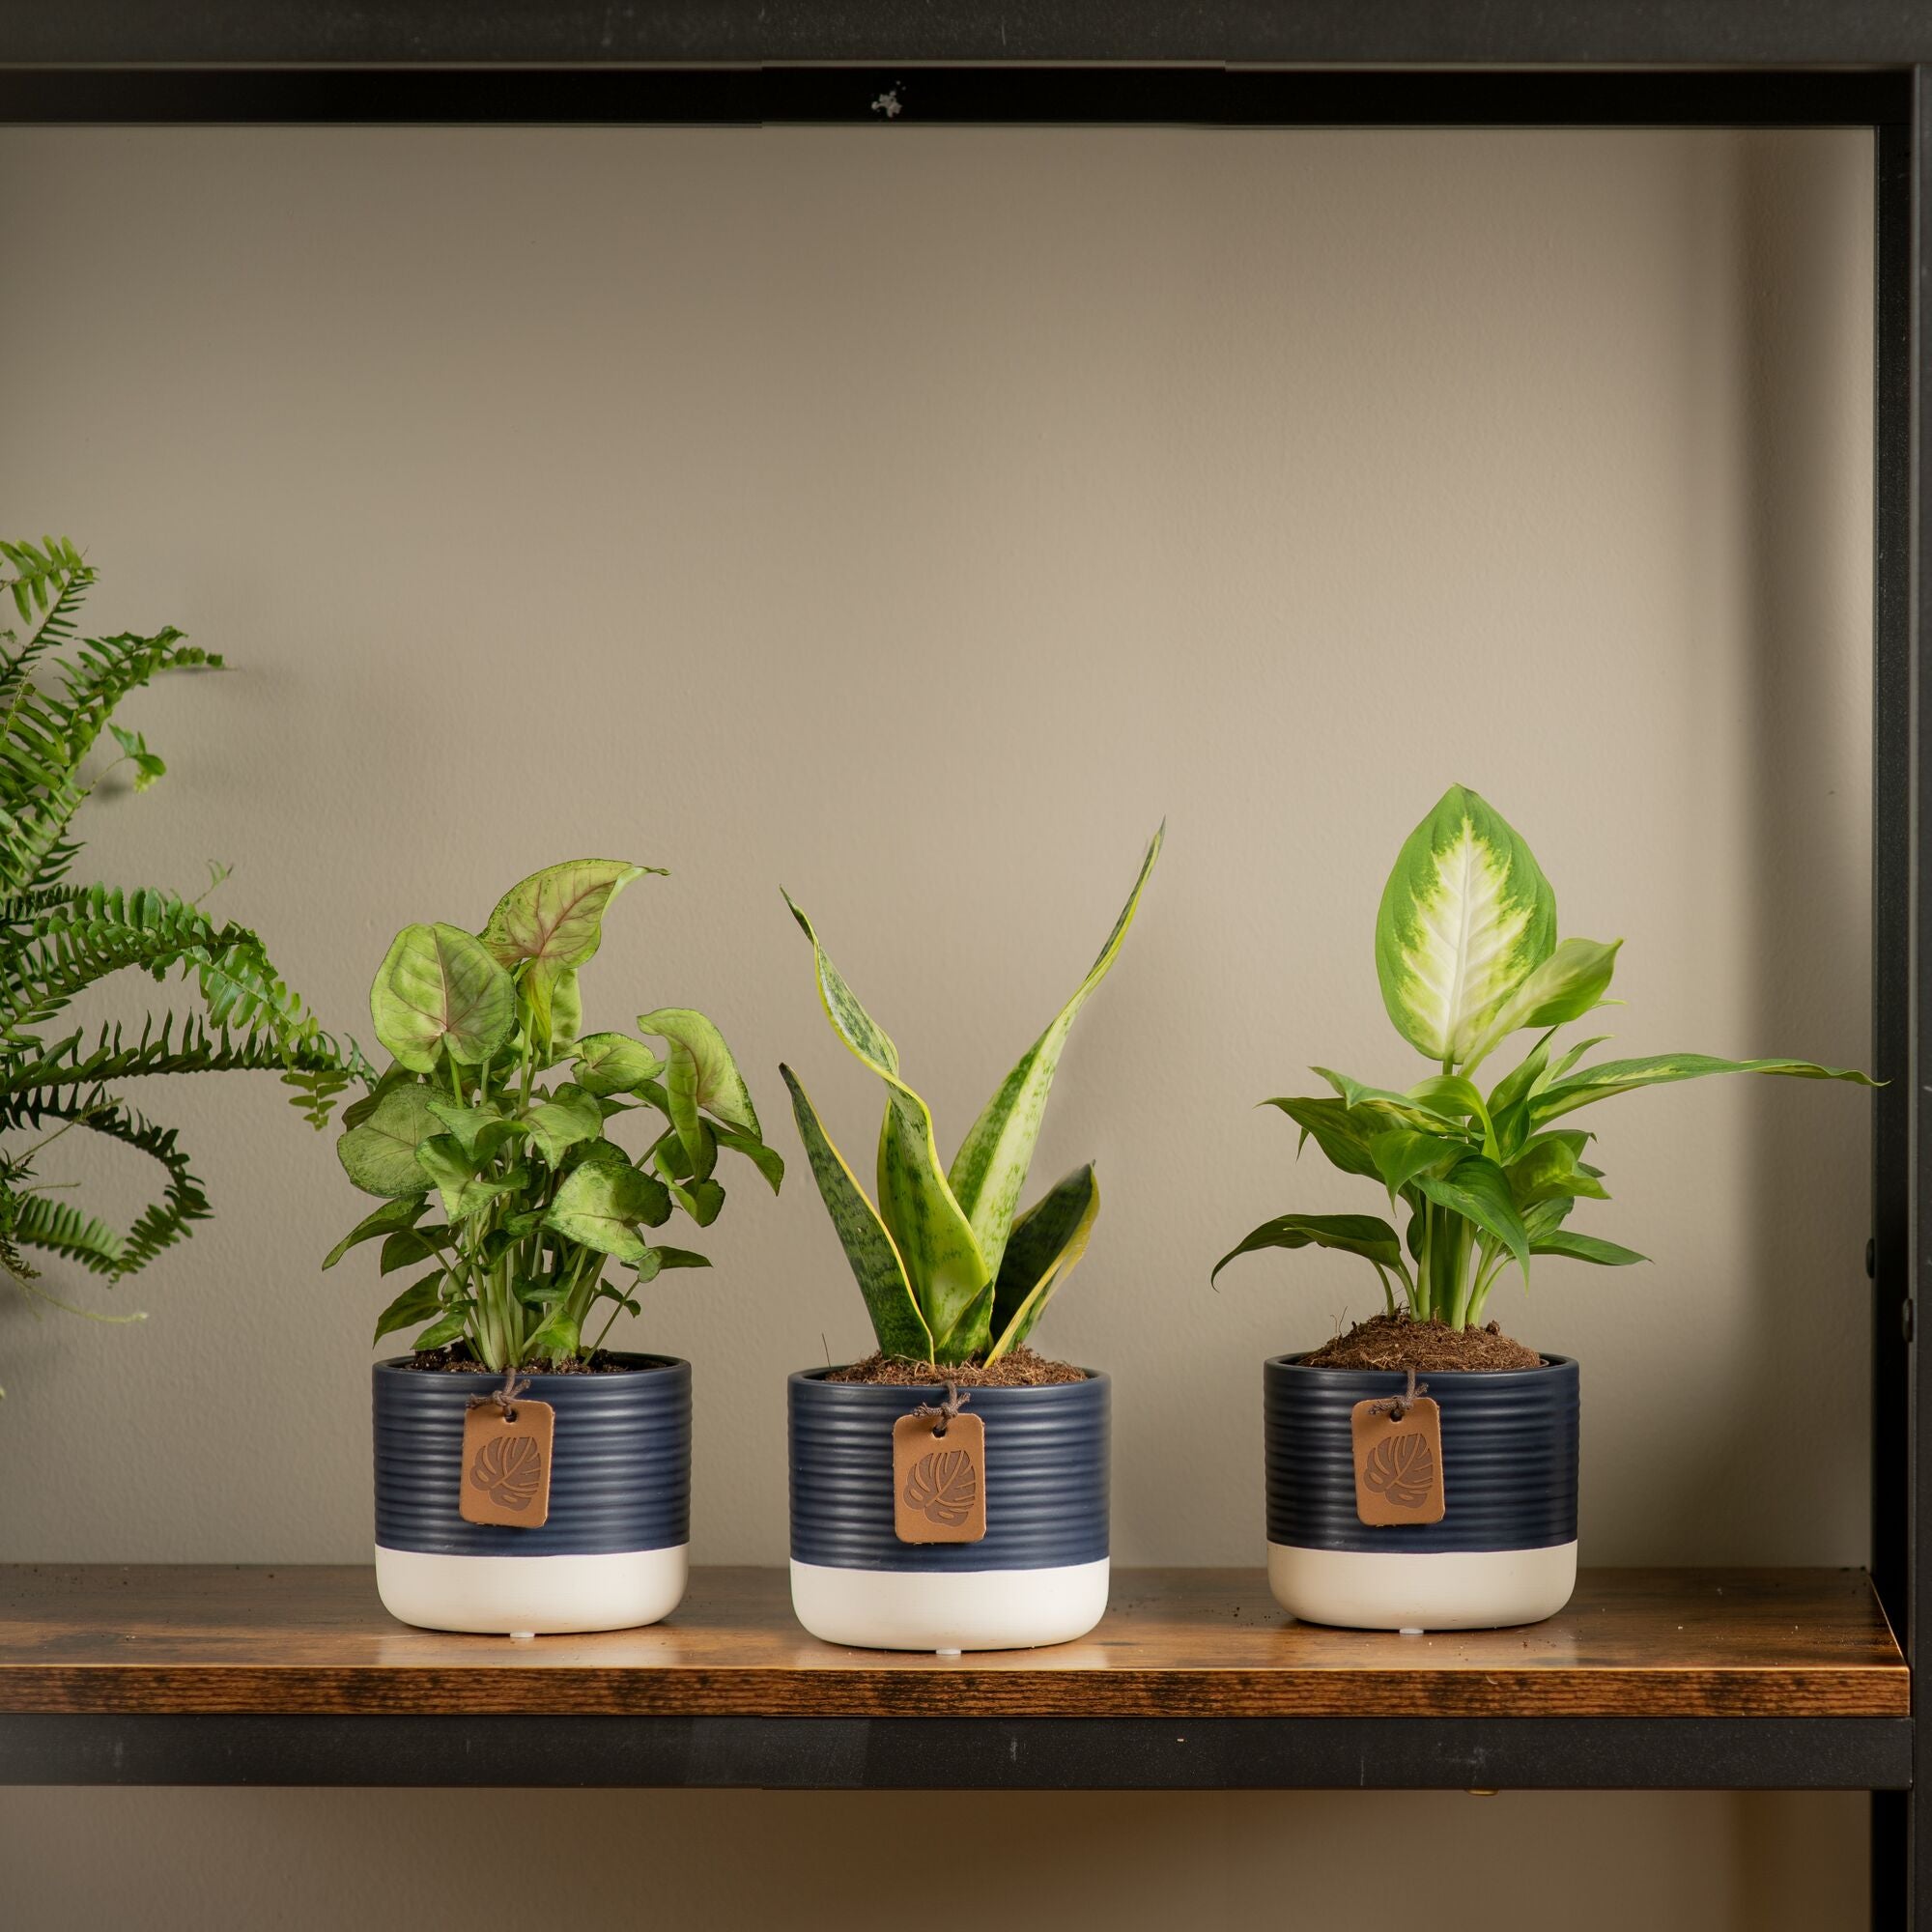 3 different varieties of plants from clean air pack plant in a textured décor pot atop a wooden and iron shelf in someones home